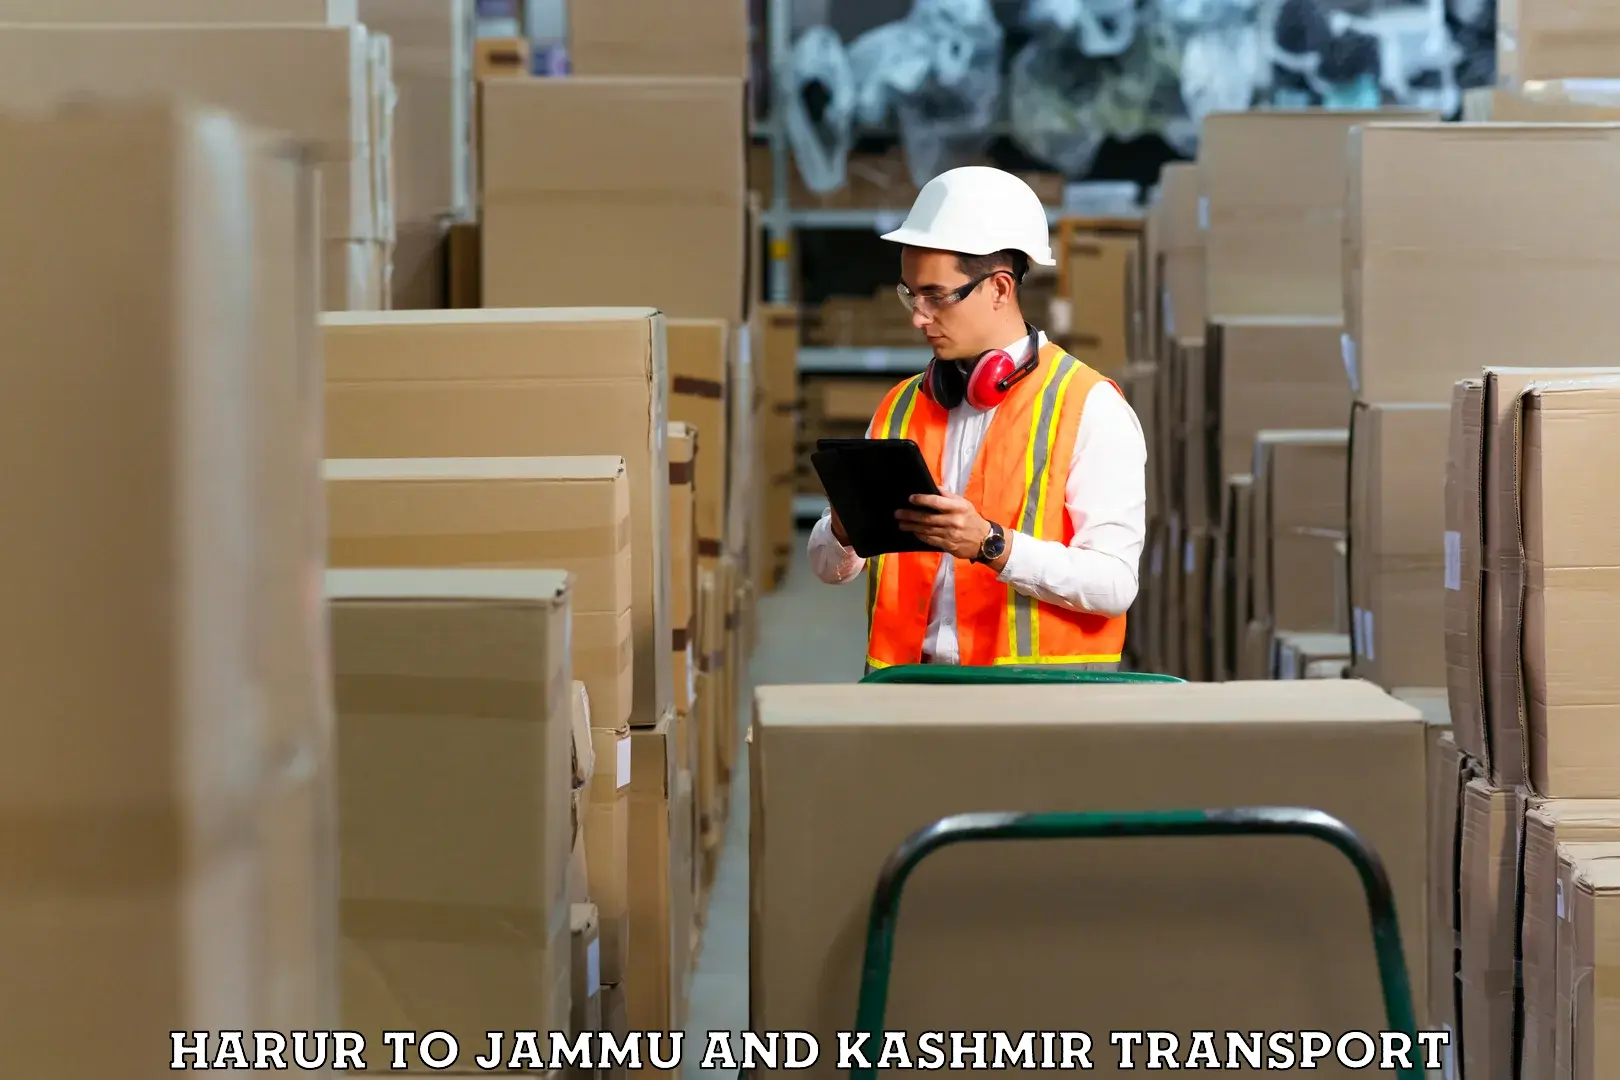 Daily parcel service transport Harur to Baramulla